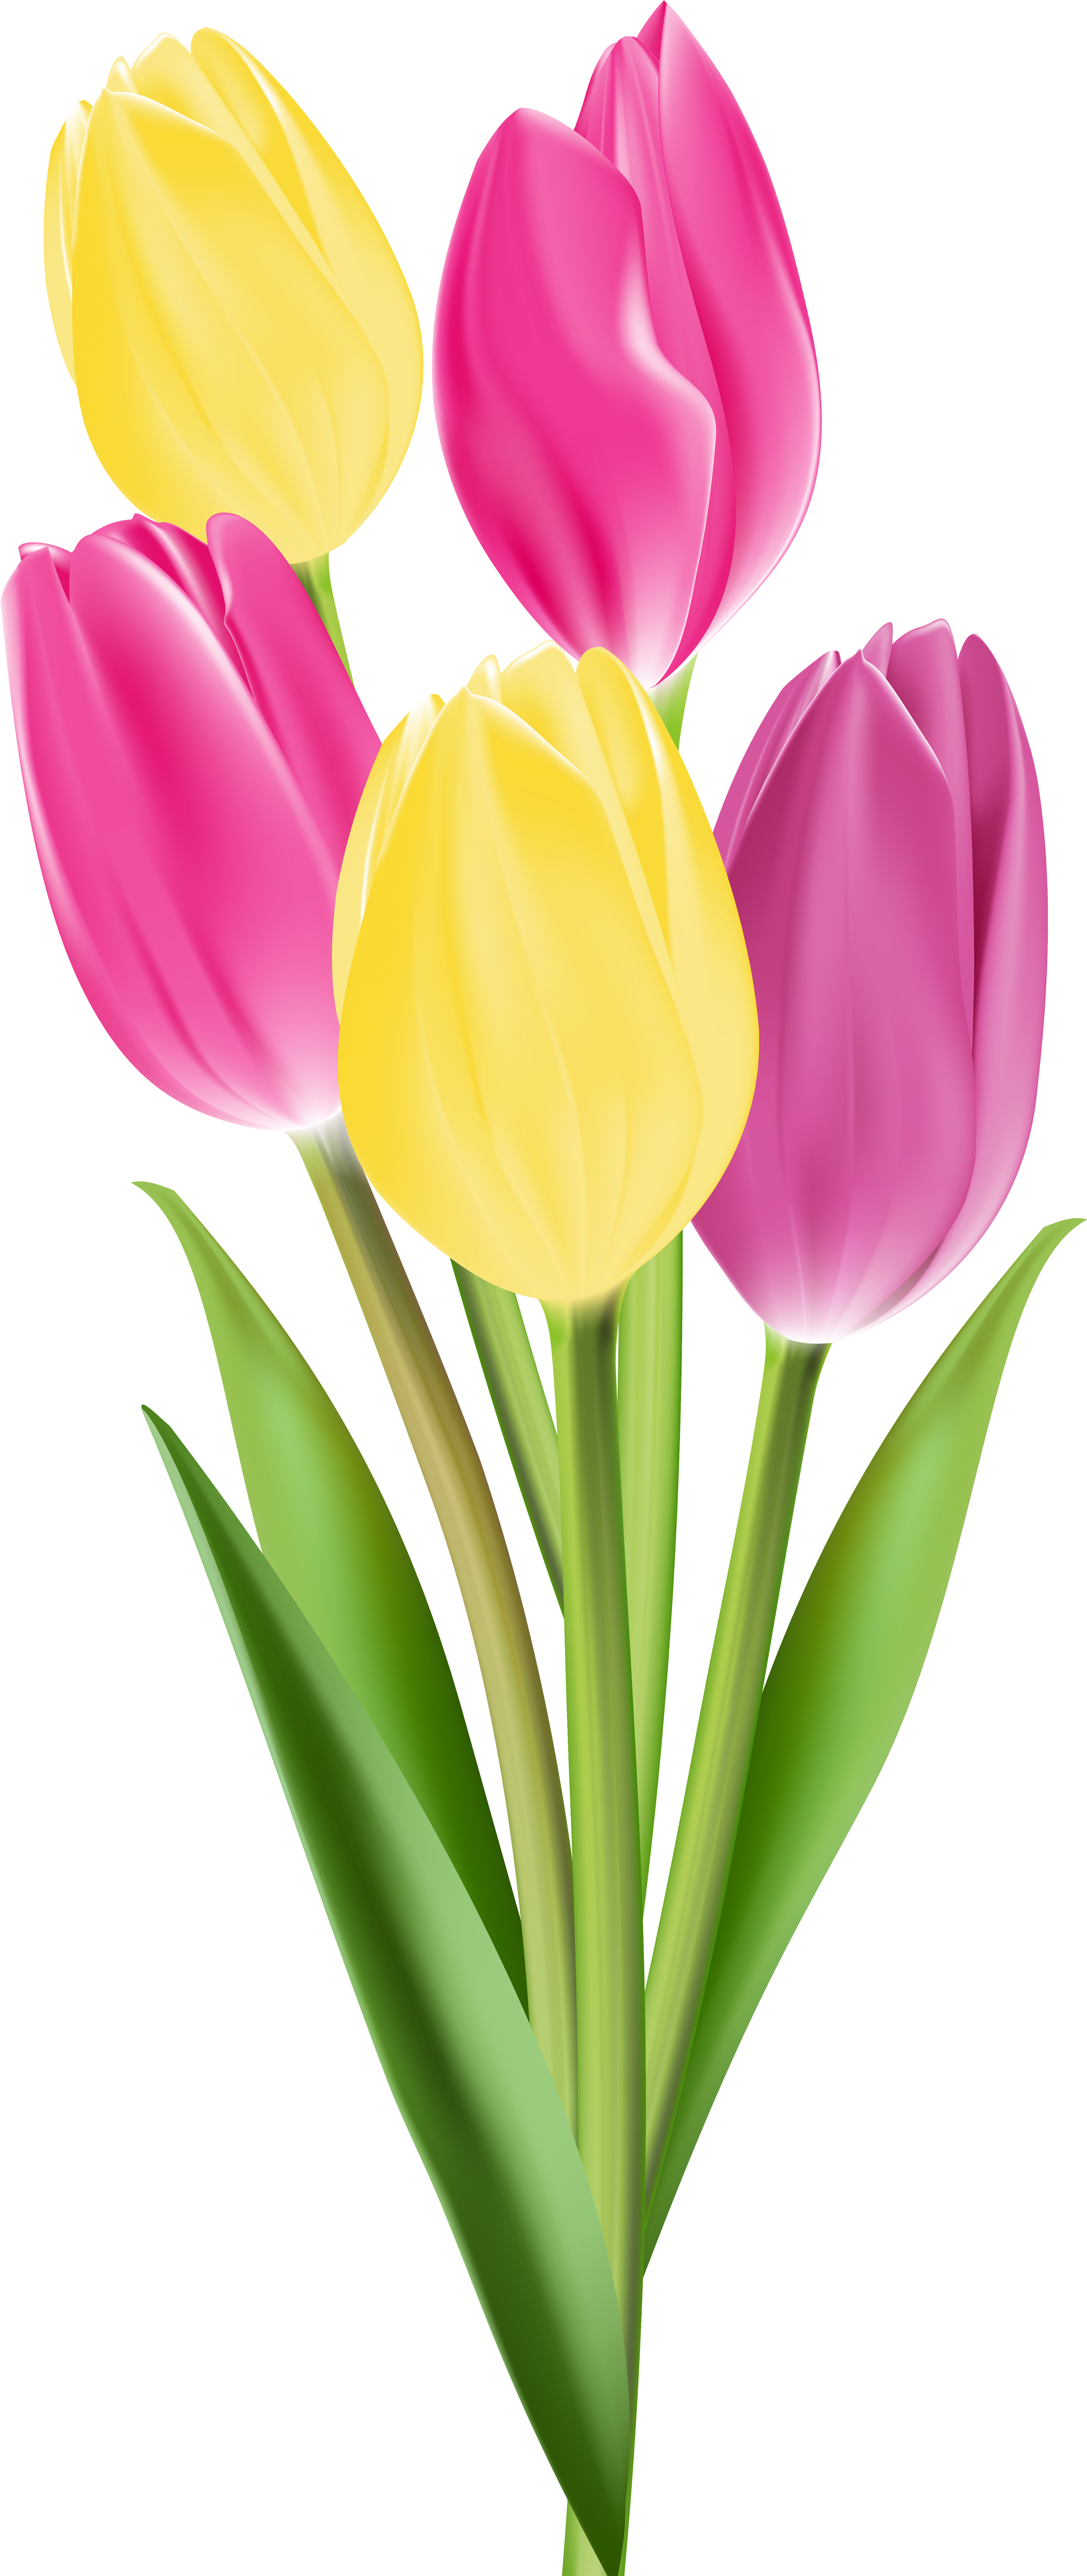 Flower Images, Flower Clips, Flower Art, Flower Crafts, - Yellow Single Tulip Png (265x600), Png Download